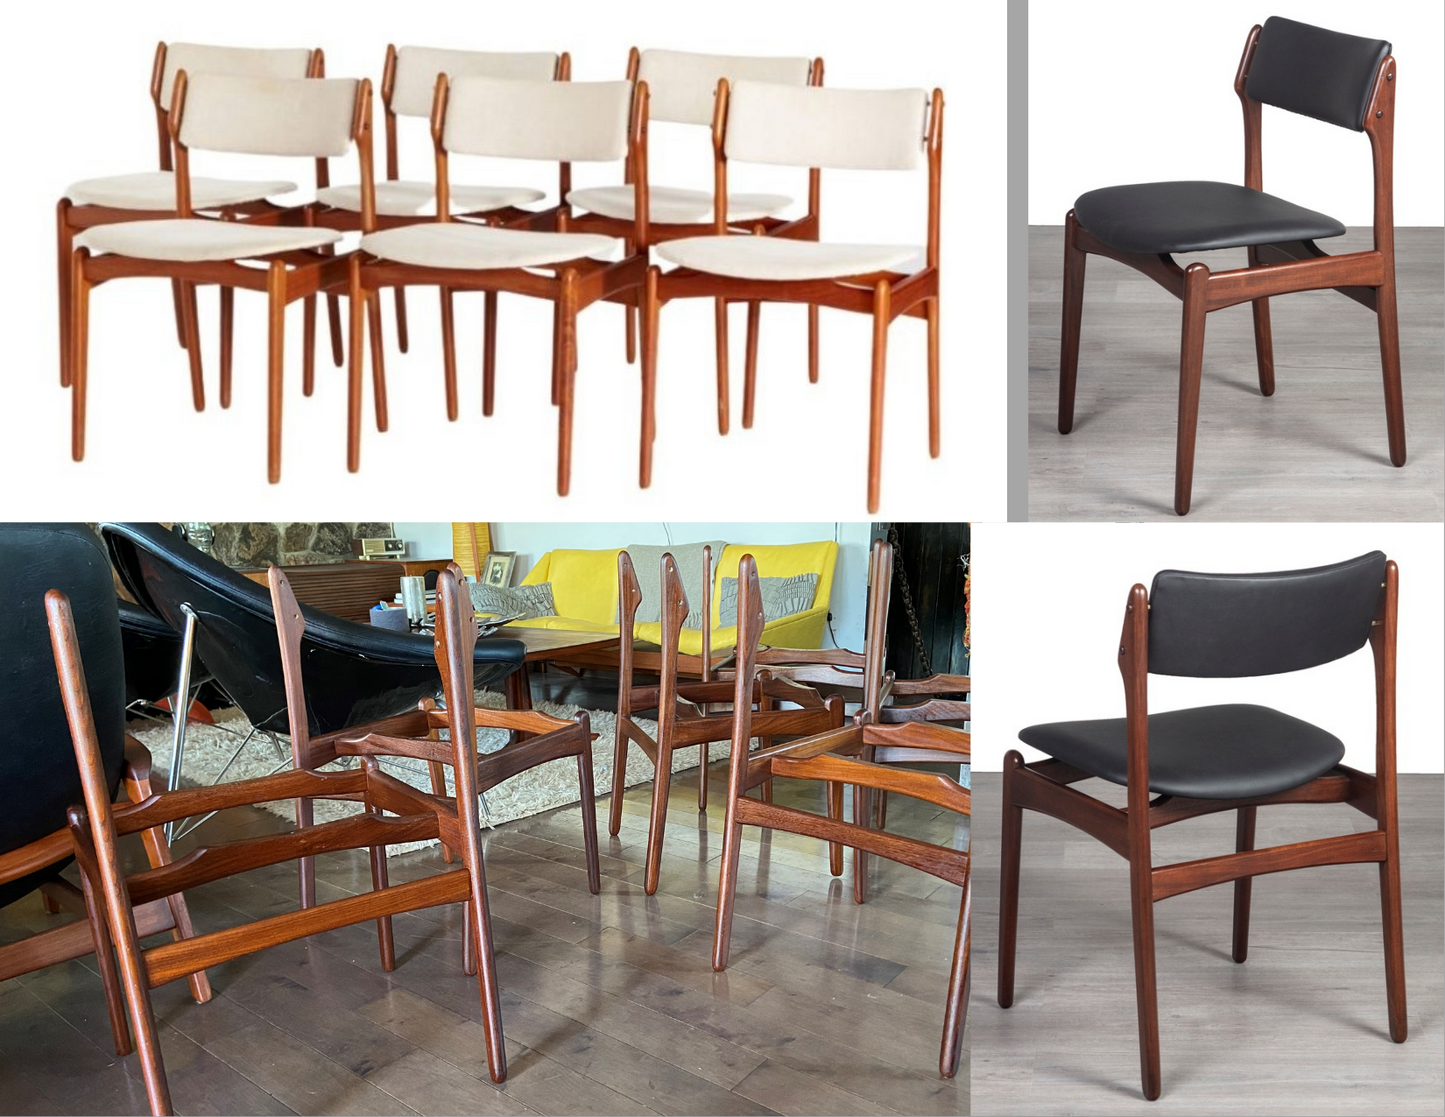 6 REFINISHED will be REUPHOLSTERED Danish Mid Century Modern E. Buch Teak Chairs, floating seats